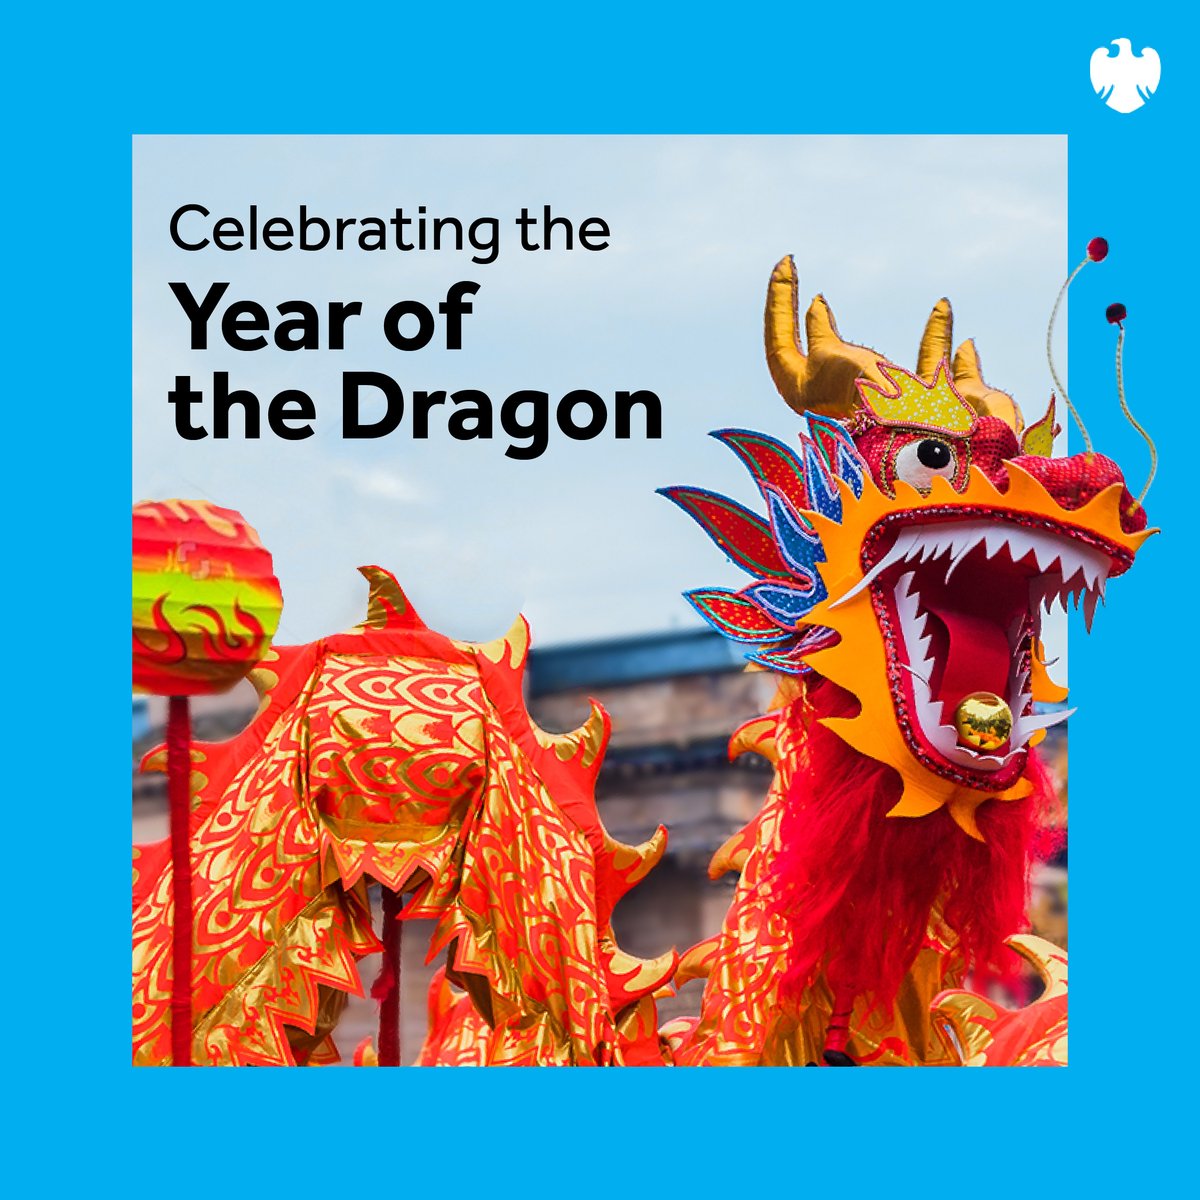 Happy Lunar New Year. May the Year of the Dragon be filled with prosperity, wealth, and longevity for you and your loved ones. Enjoy a fun, festive, and fruitful new year.